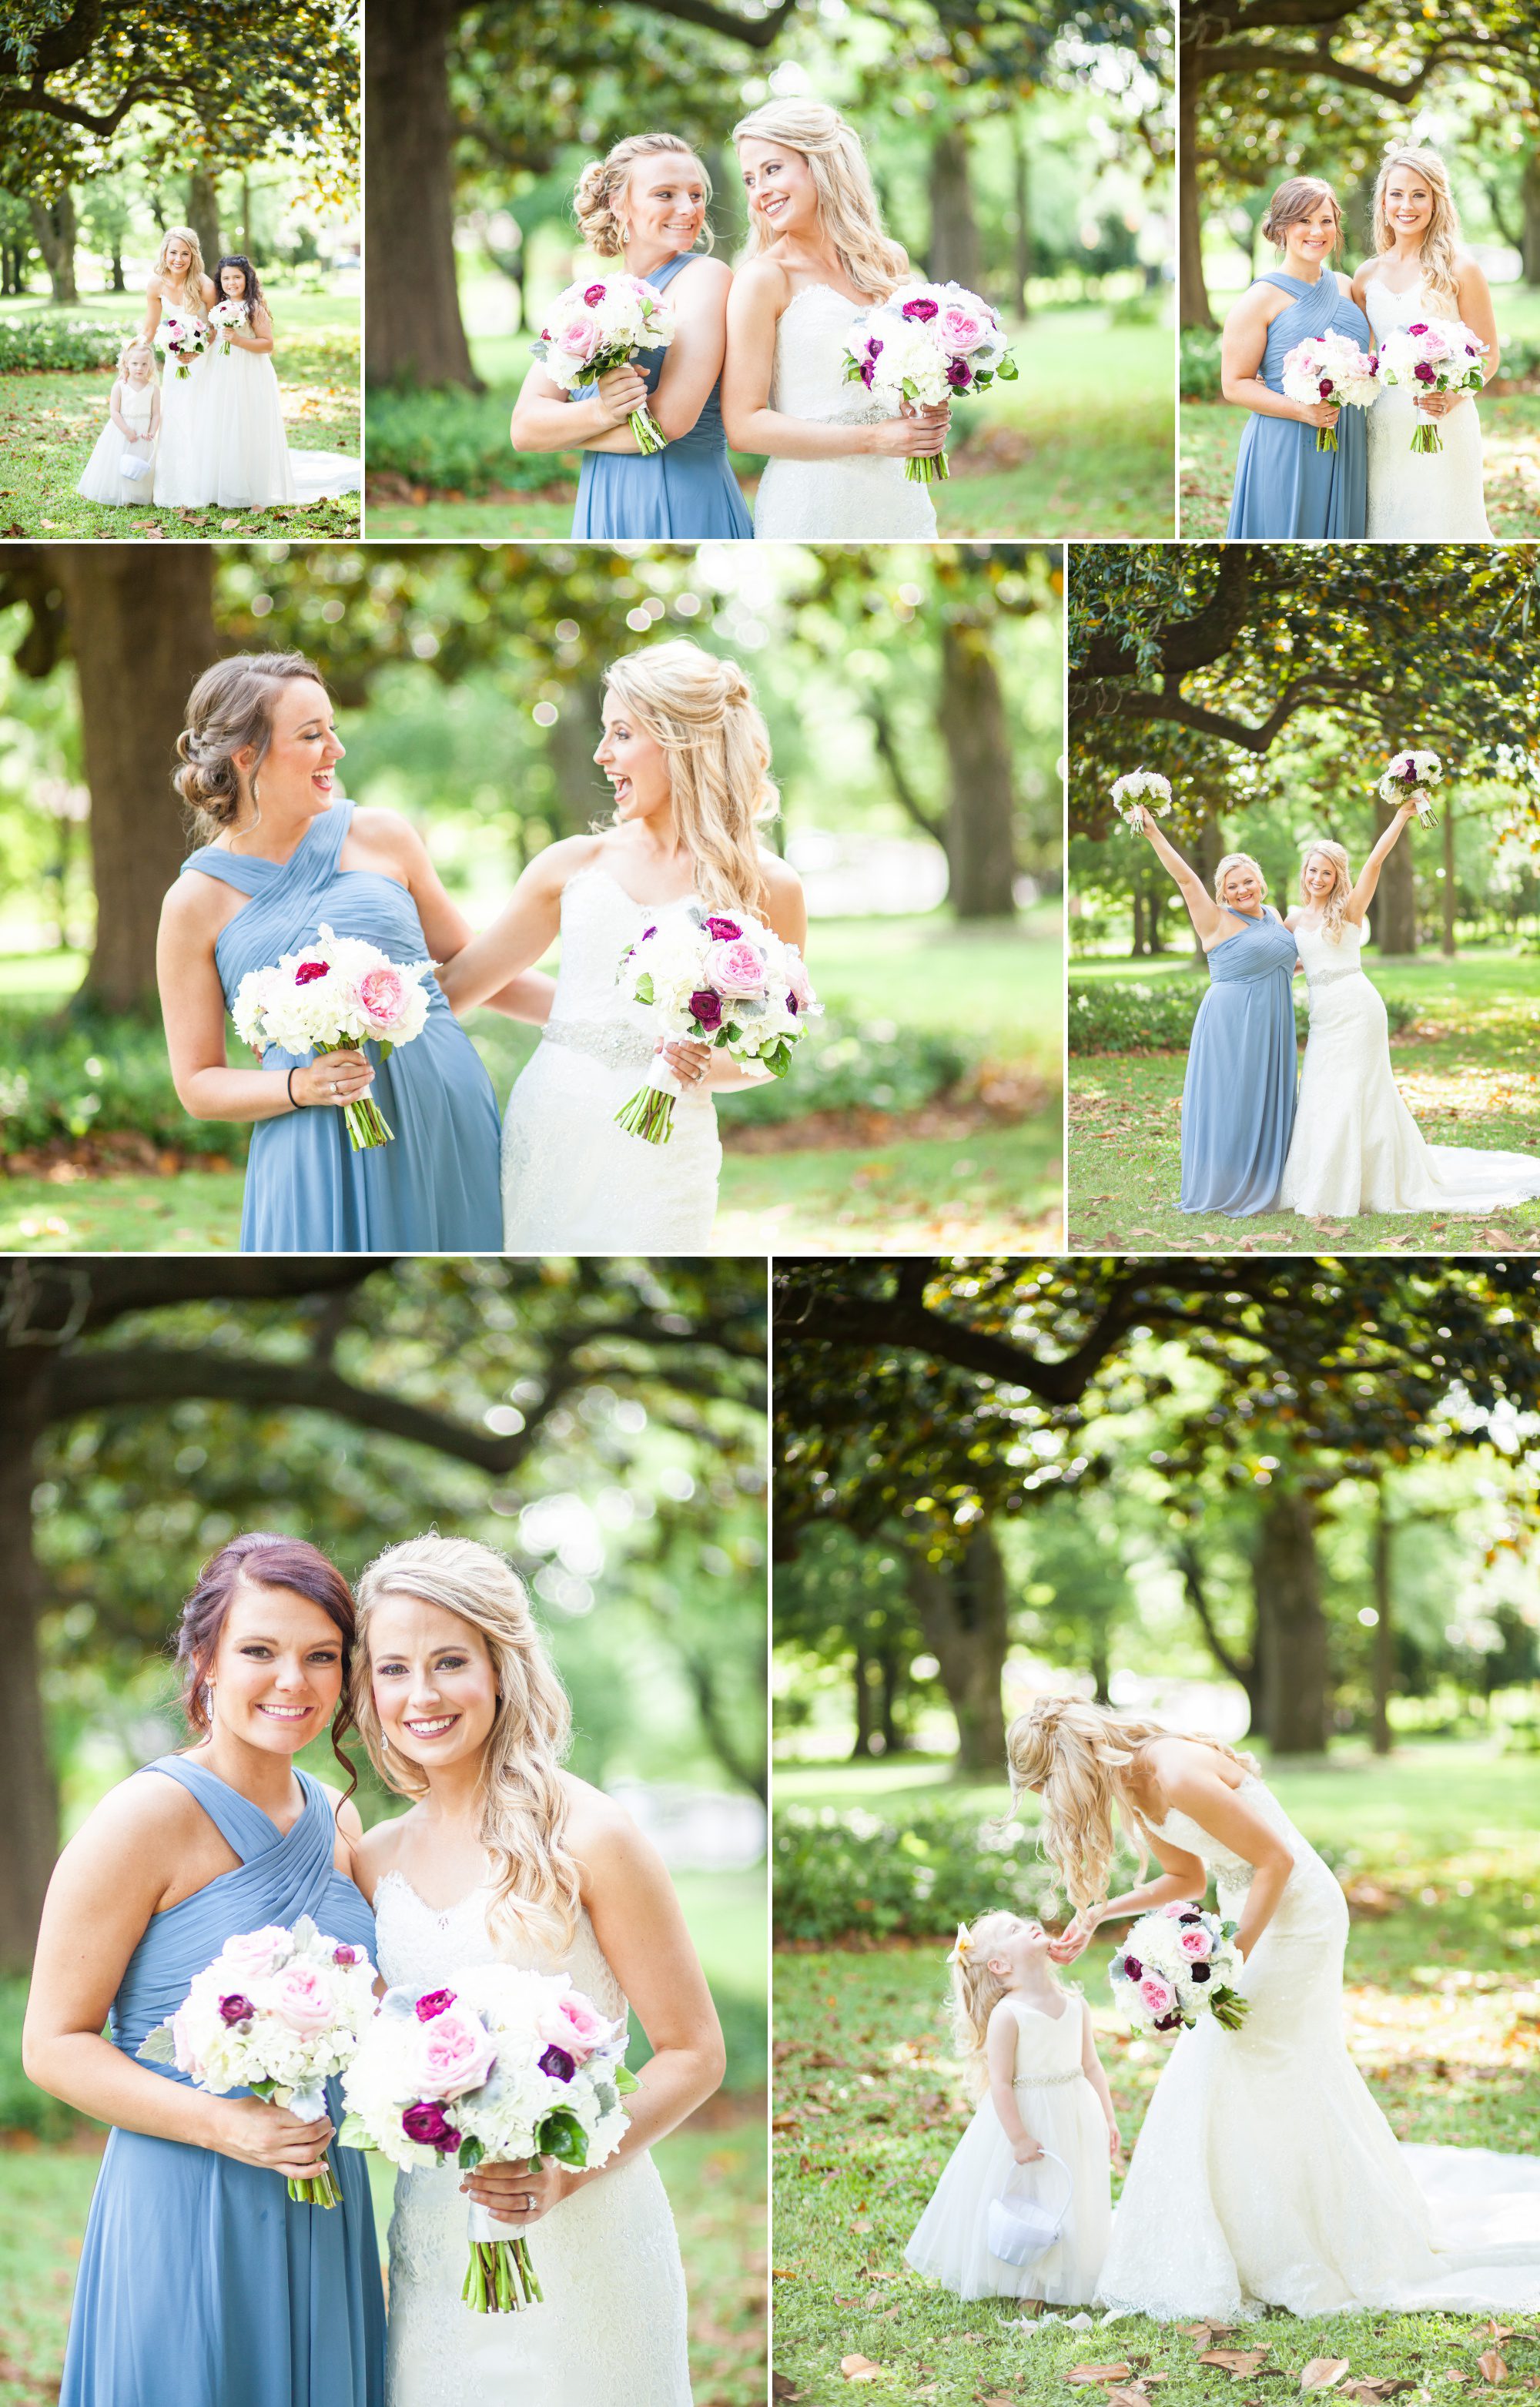 Bride with bridesmaids before wedding ceremony at Riverwood Mansion in Nashville, Tennessee. Photography by Krista Lee.